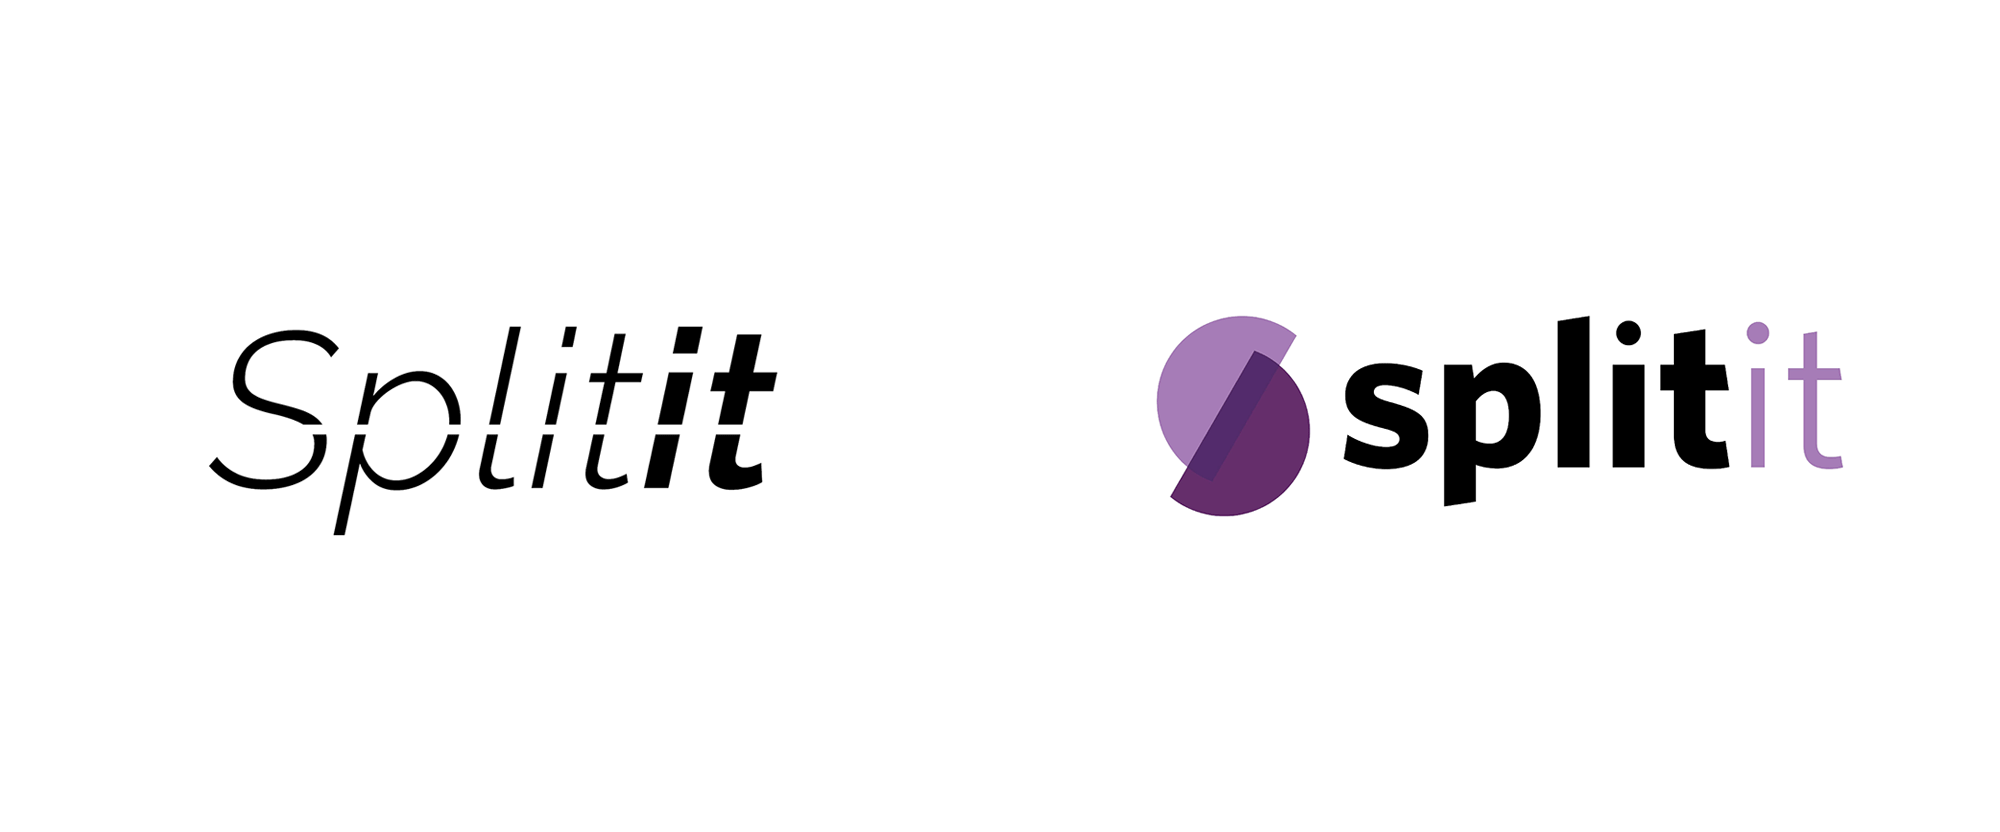 New Logo and Identity for Splitit by The Ricciardi Group